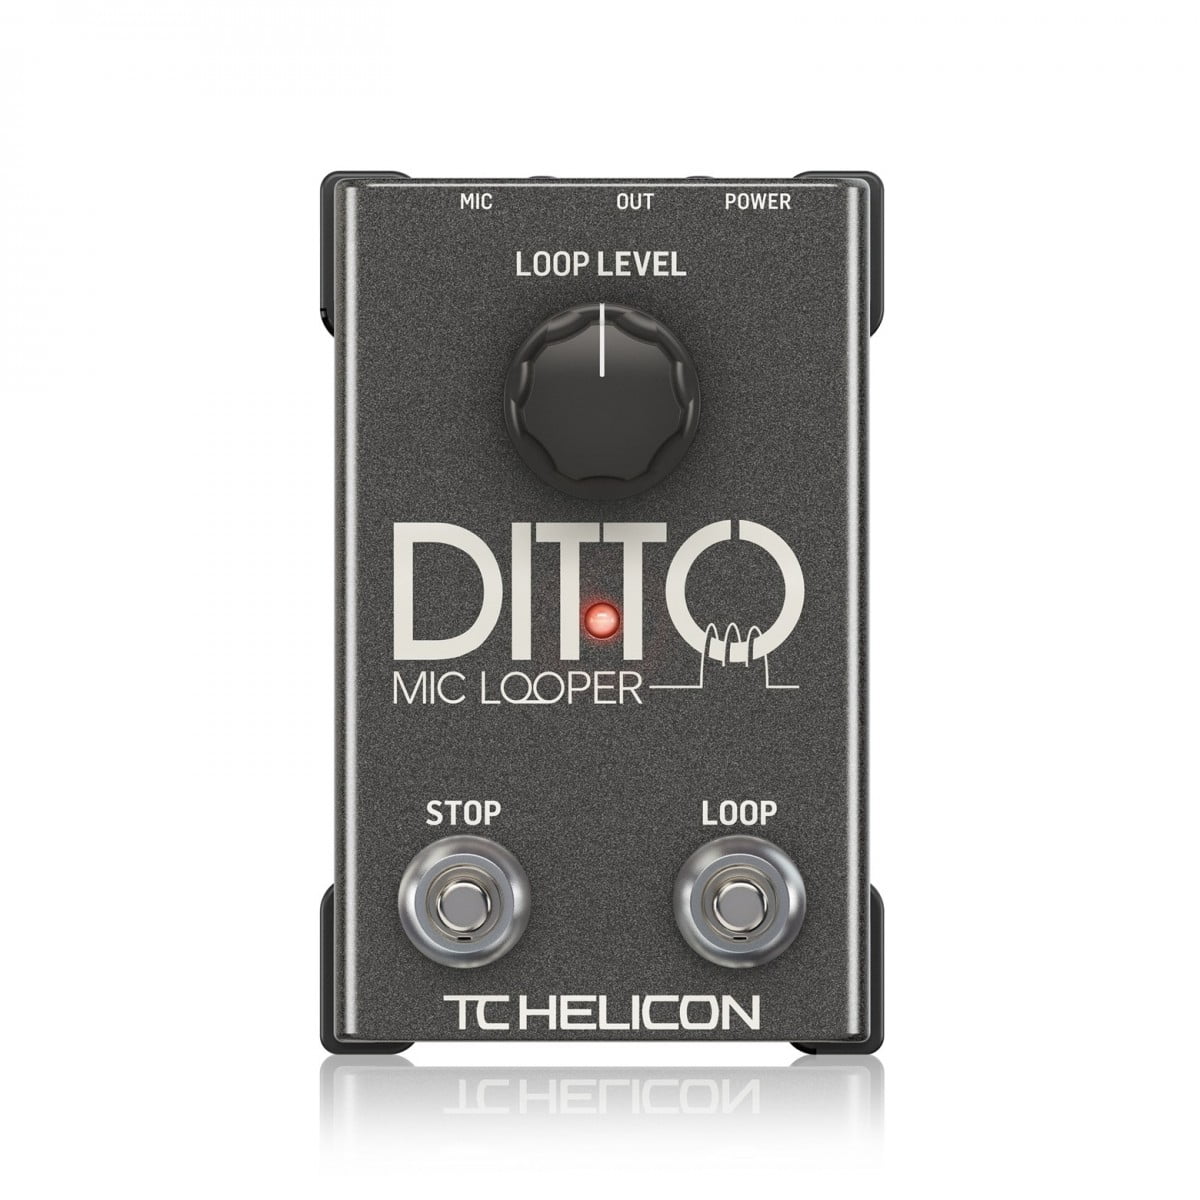 TC Helicon Ditto Mic Looper - New TC Helicon      Looper             Guitar Effect Pedal